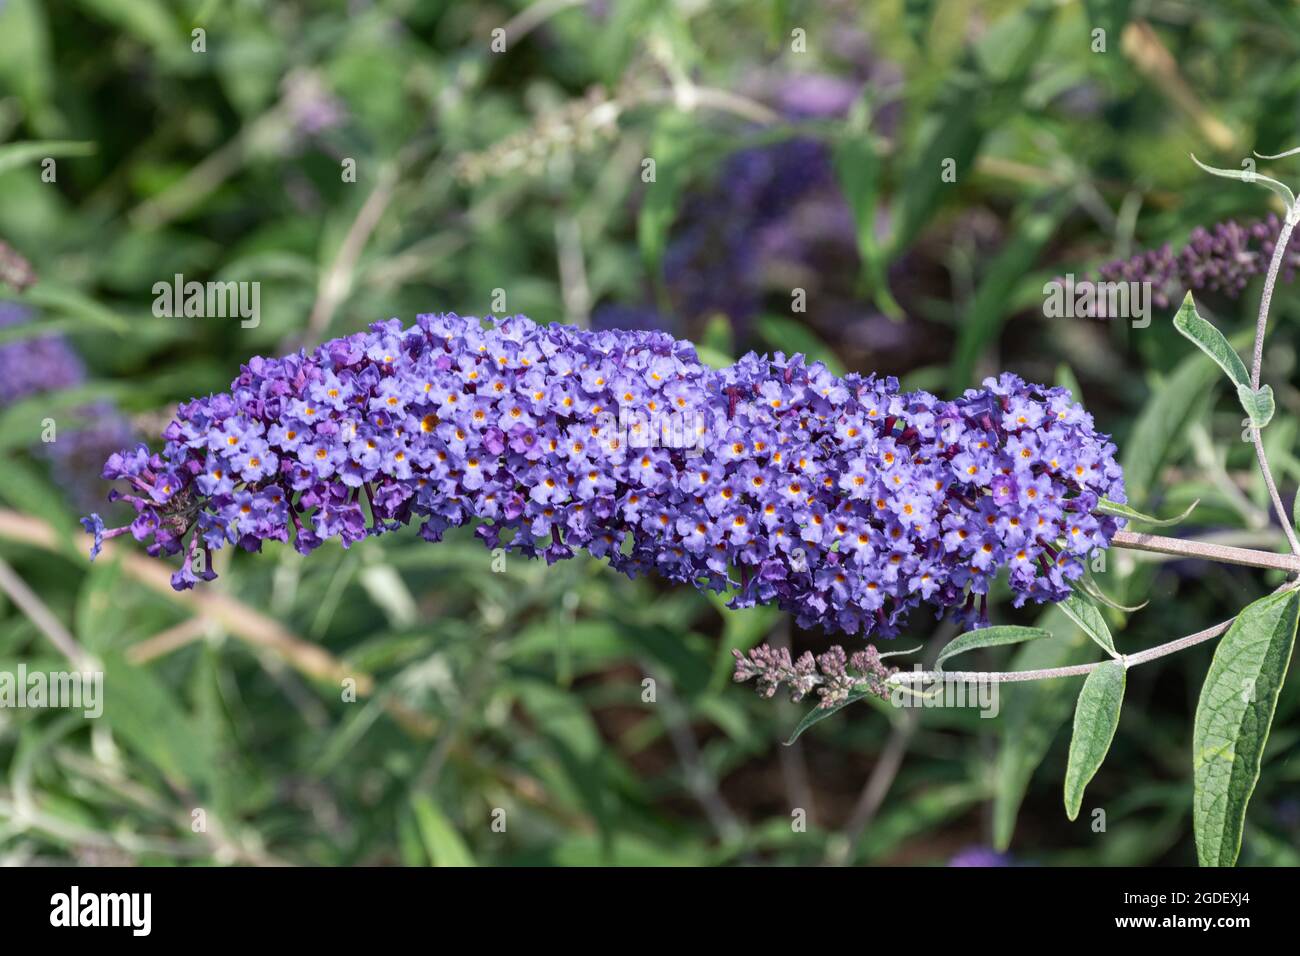 Buddleja davidii Nanho Blue (buddleia variety), known as a butterfly bush, in flower during august or summer, UK Stock Photo